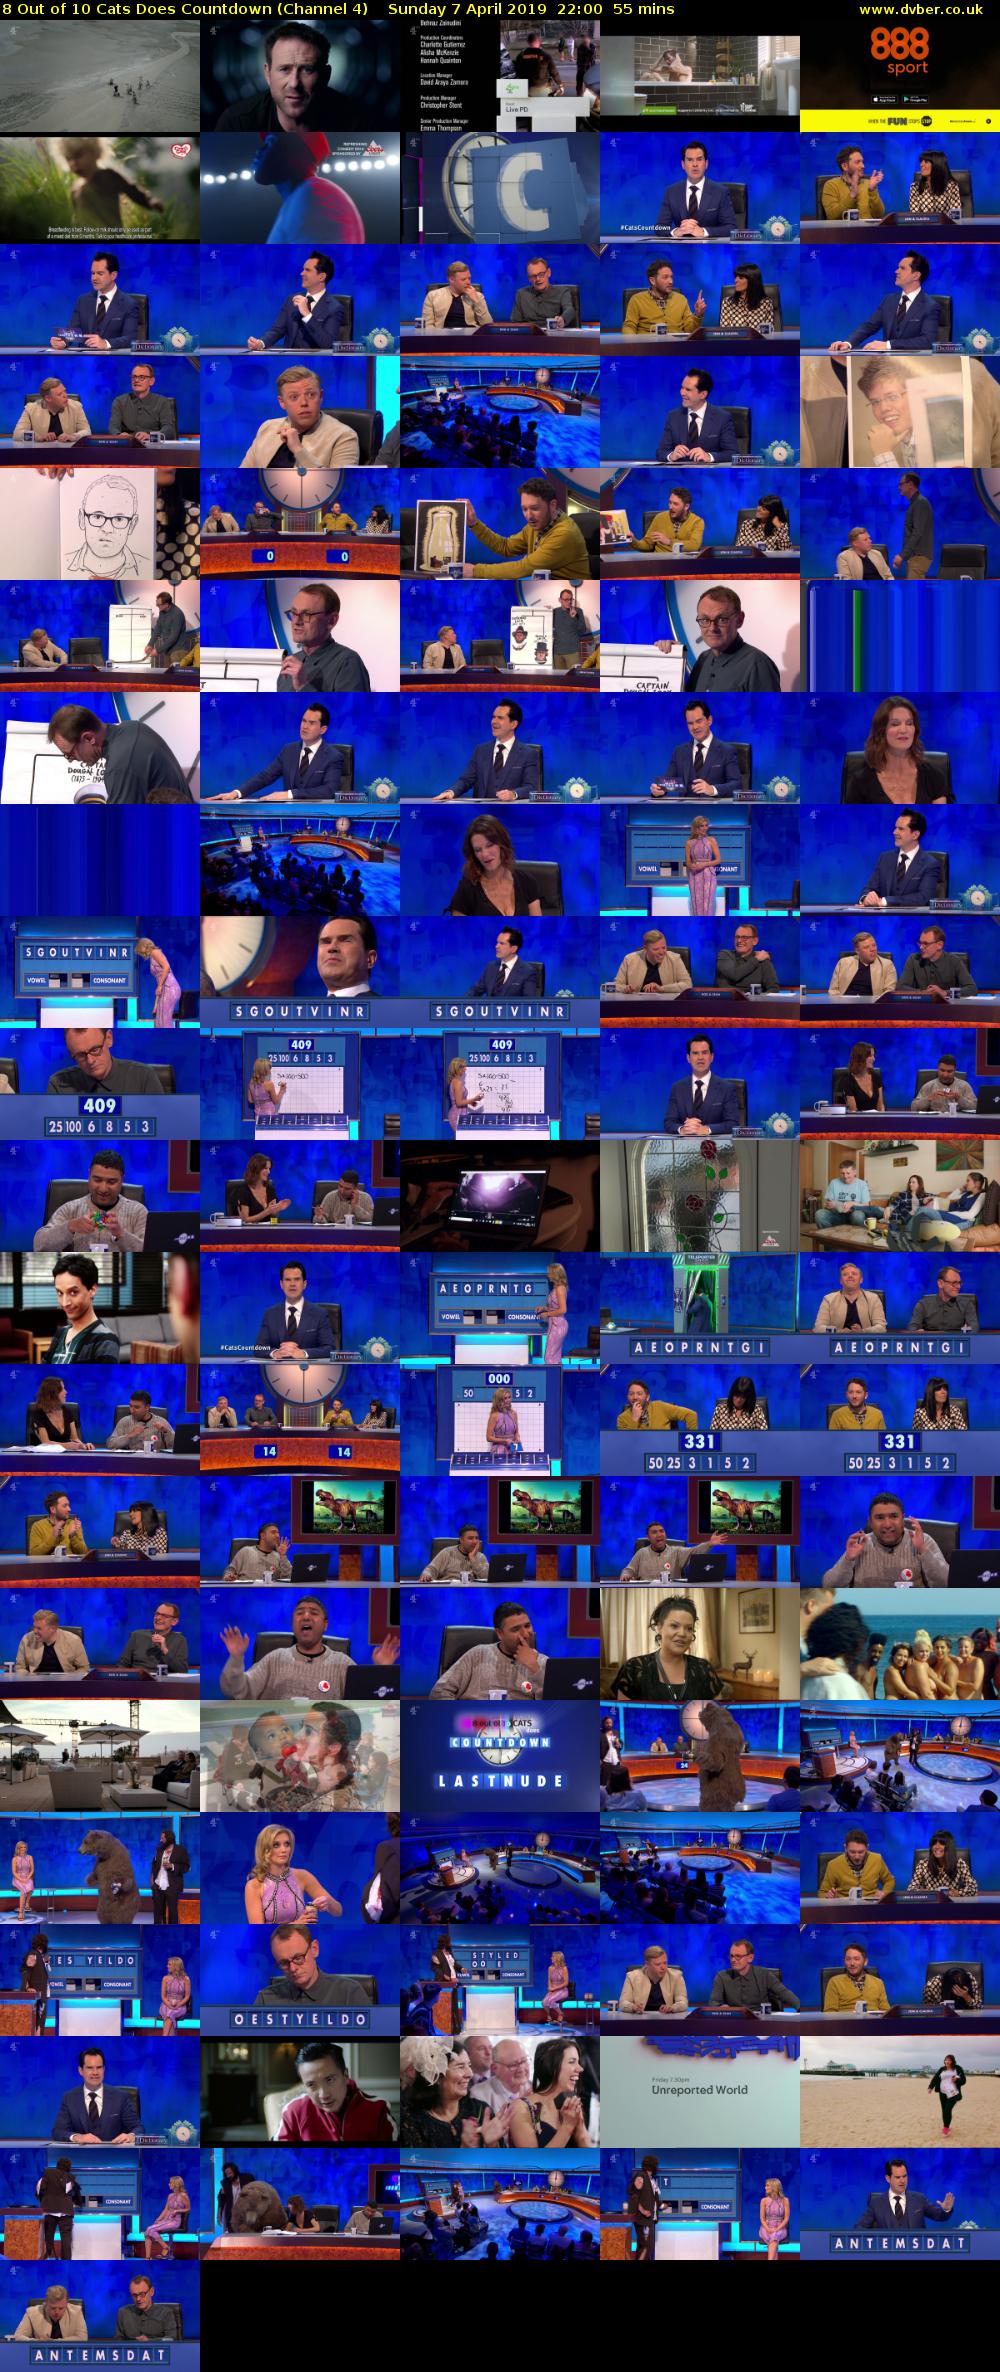 8 Out of 10 Cats Does Countdown (Channel 4) Sunday 7 April 2019 22:00 - 22:55